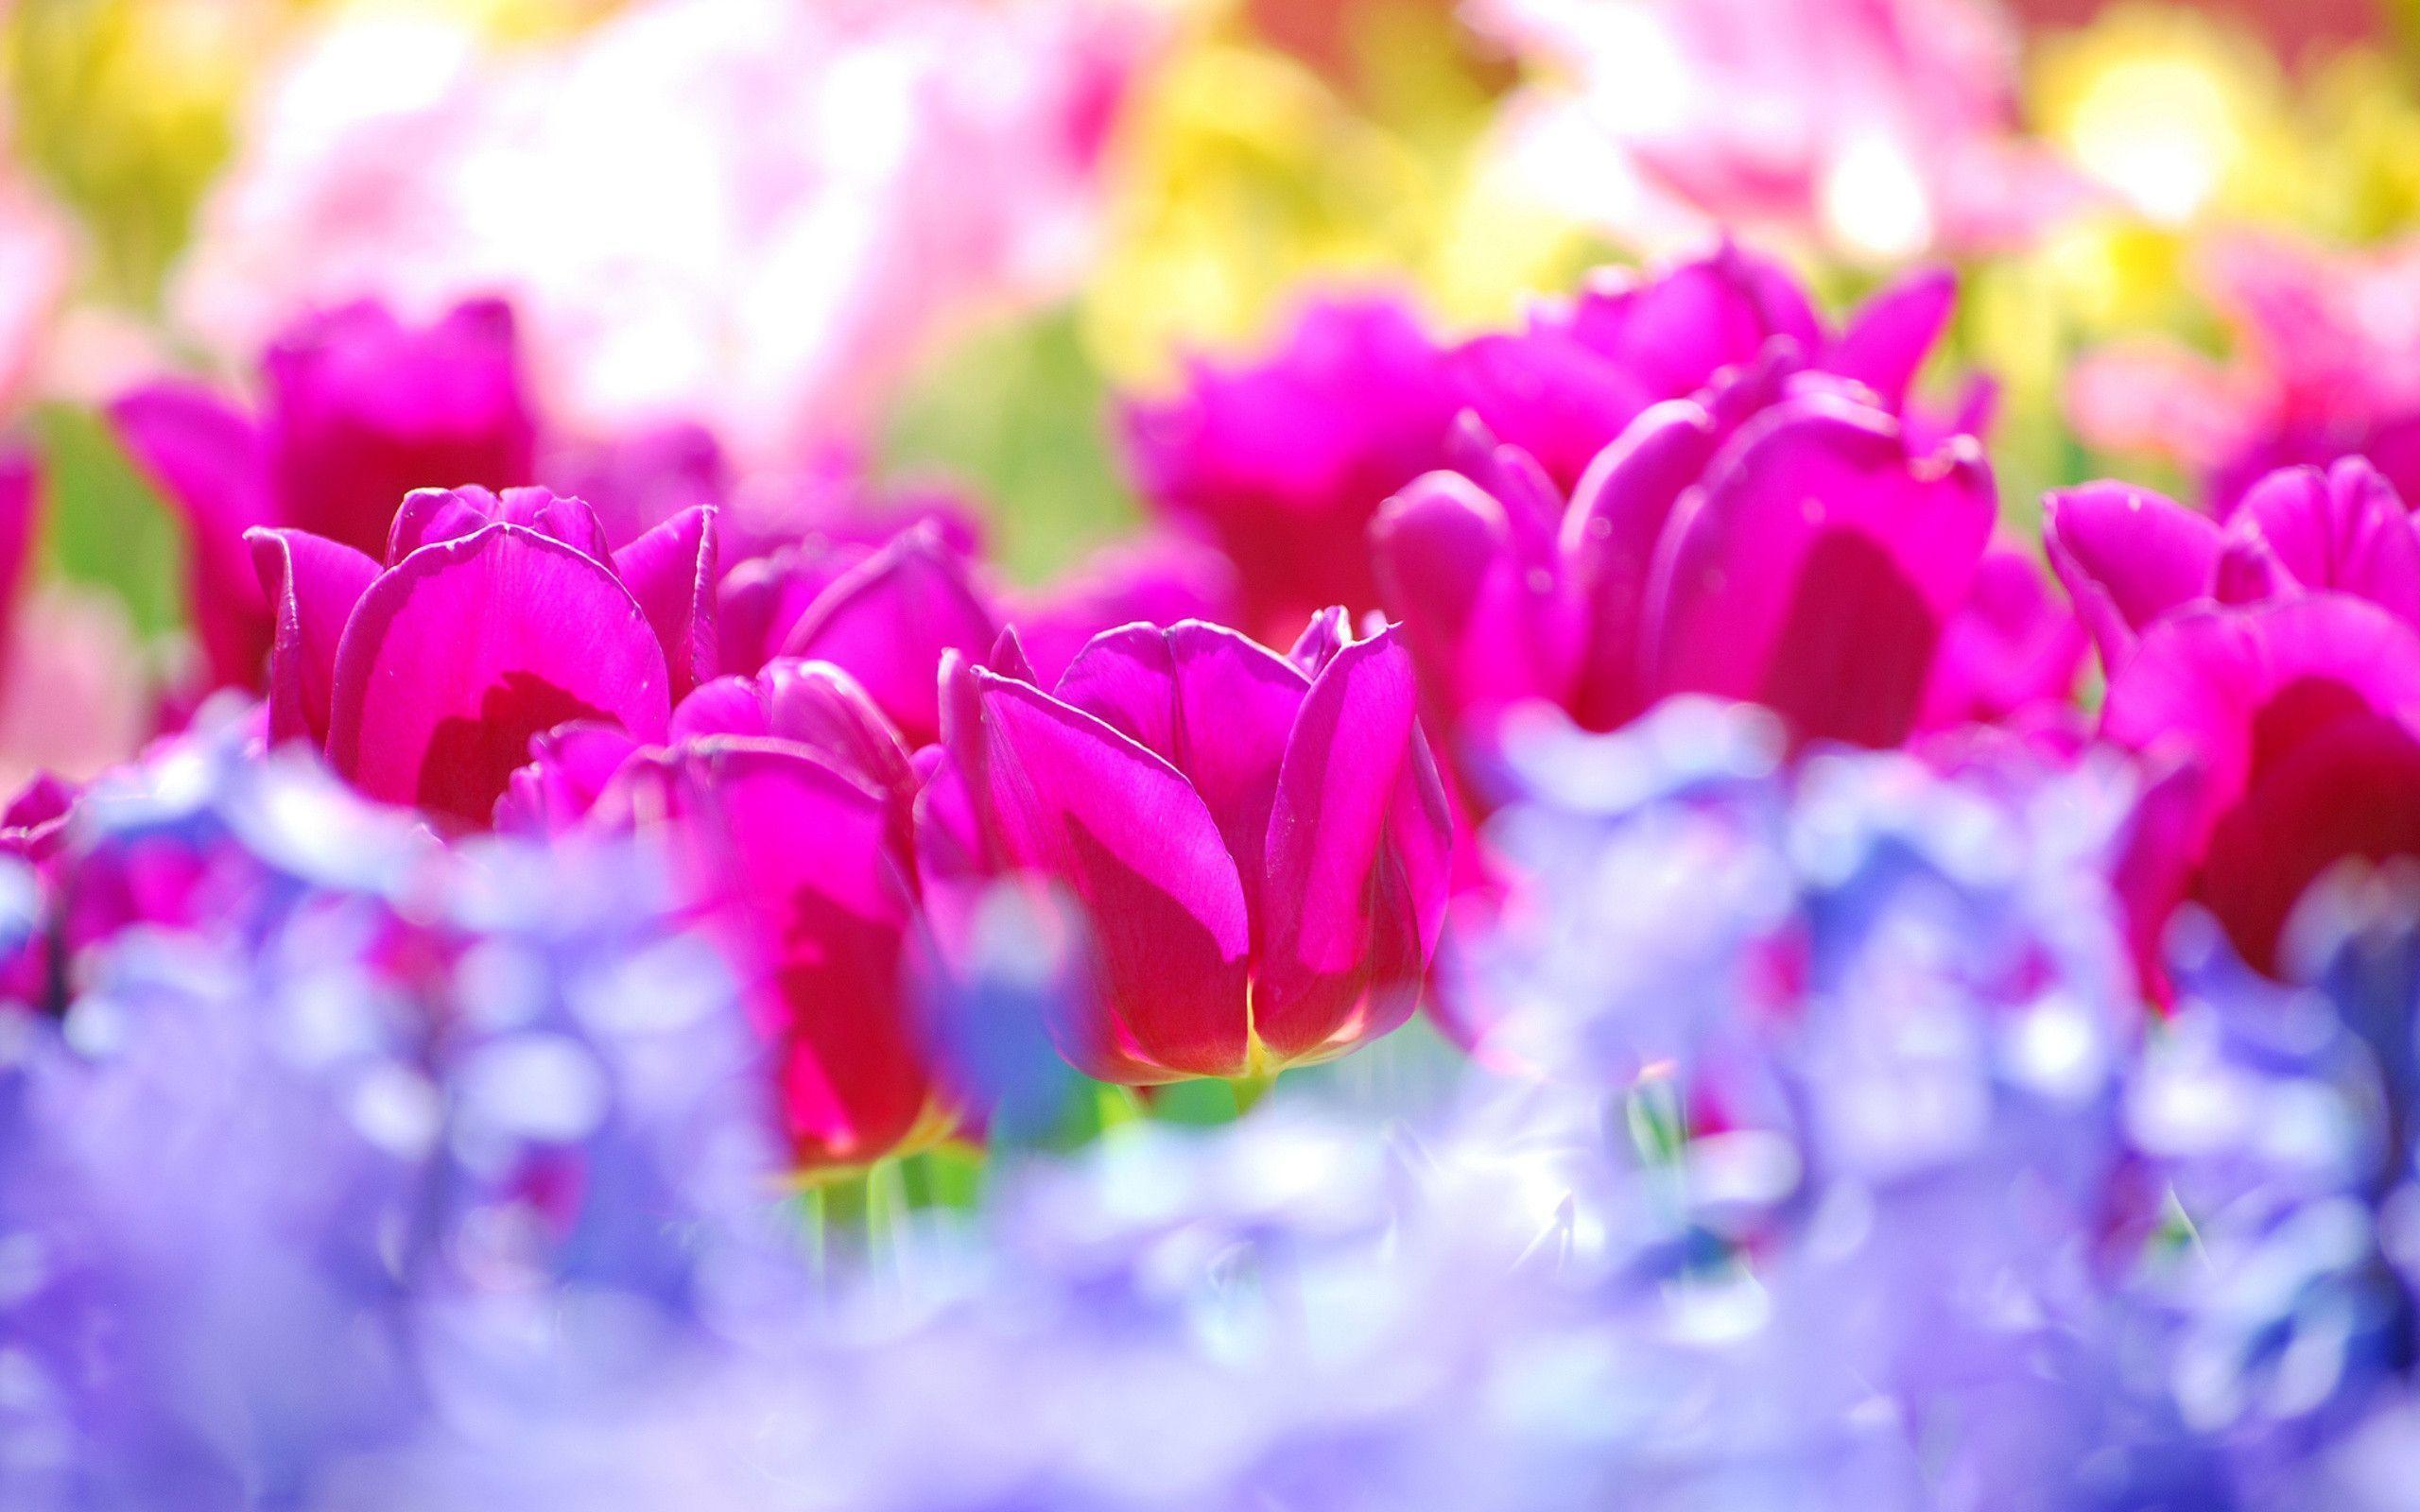 Summer Flowers Background Hq Cool 14 HD Wallpaper. Hdimges